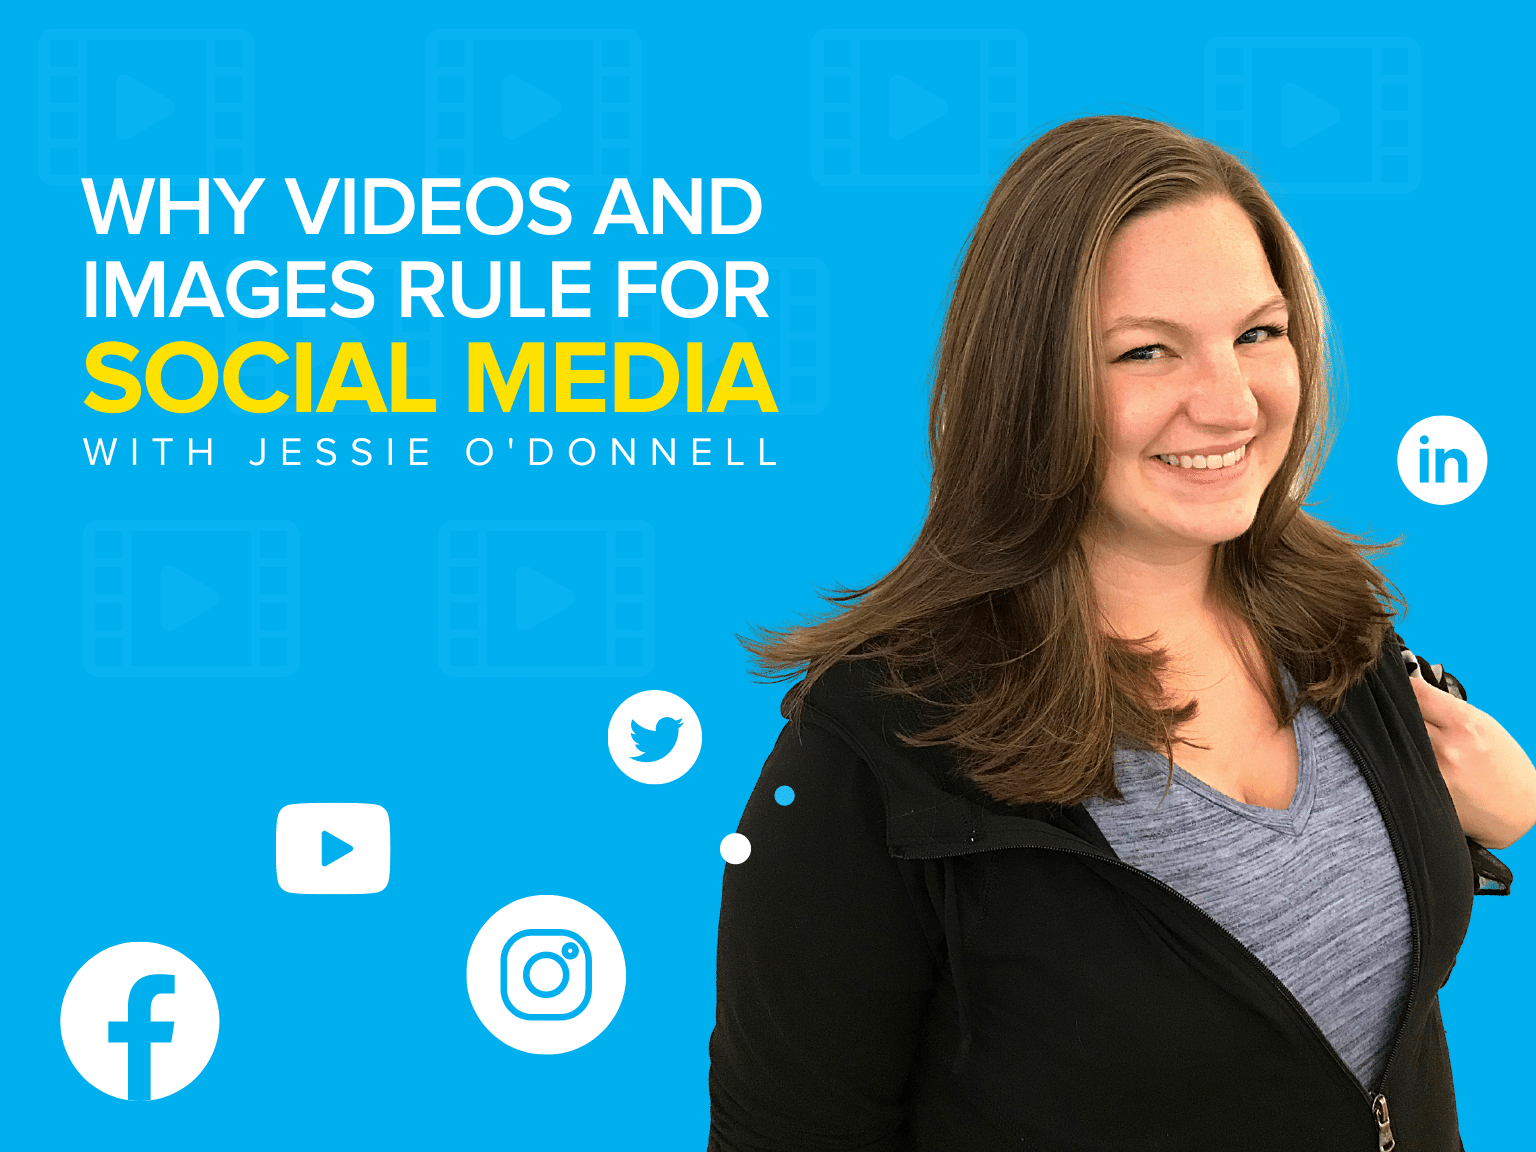 Why Videos and Images Rule for Social Media with Jessie O'Donnell